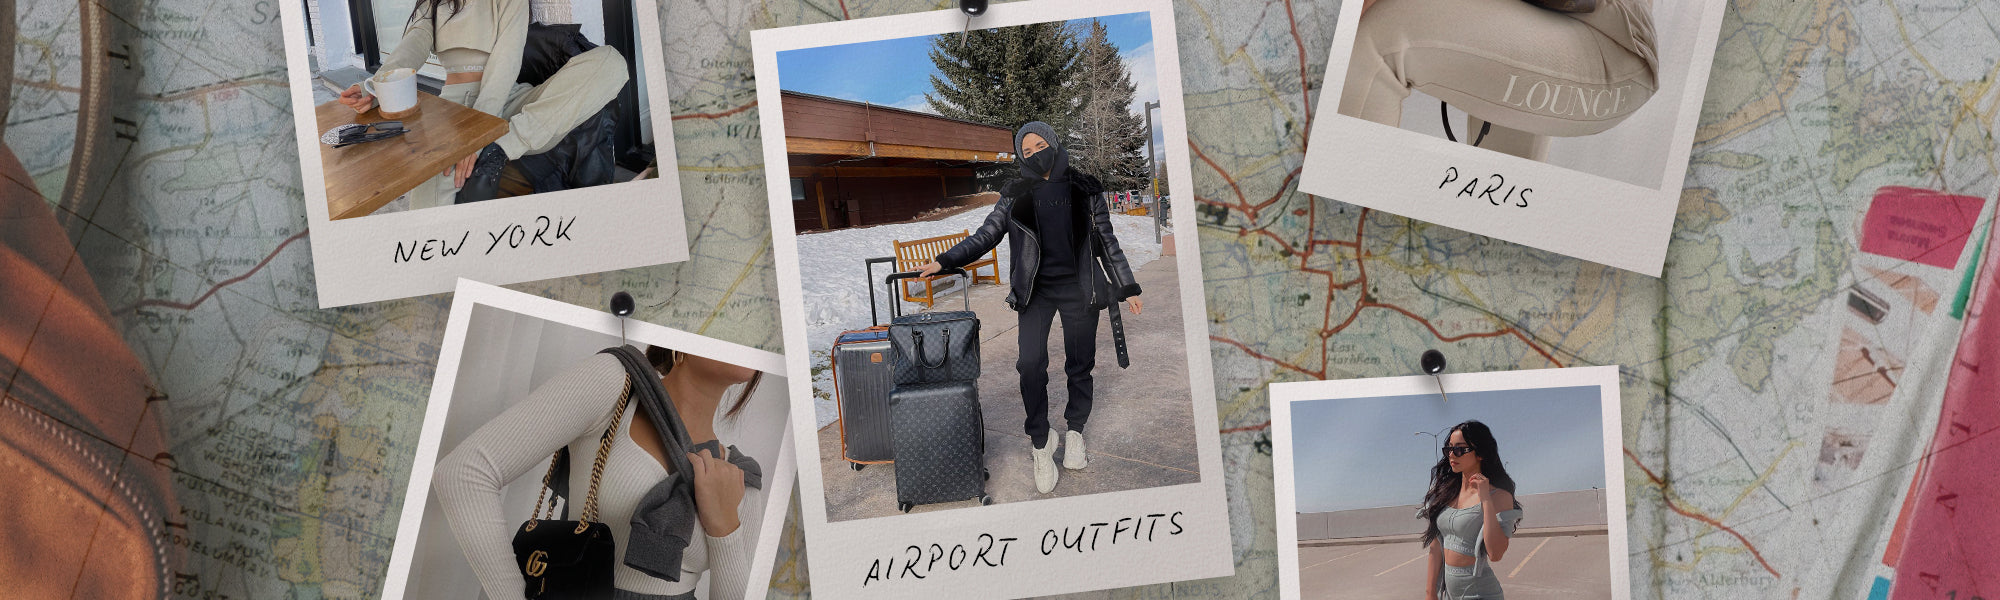 Airport Outfits For Your Winter Getaway